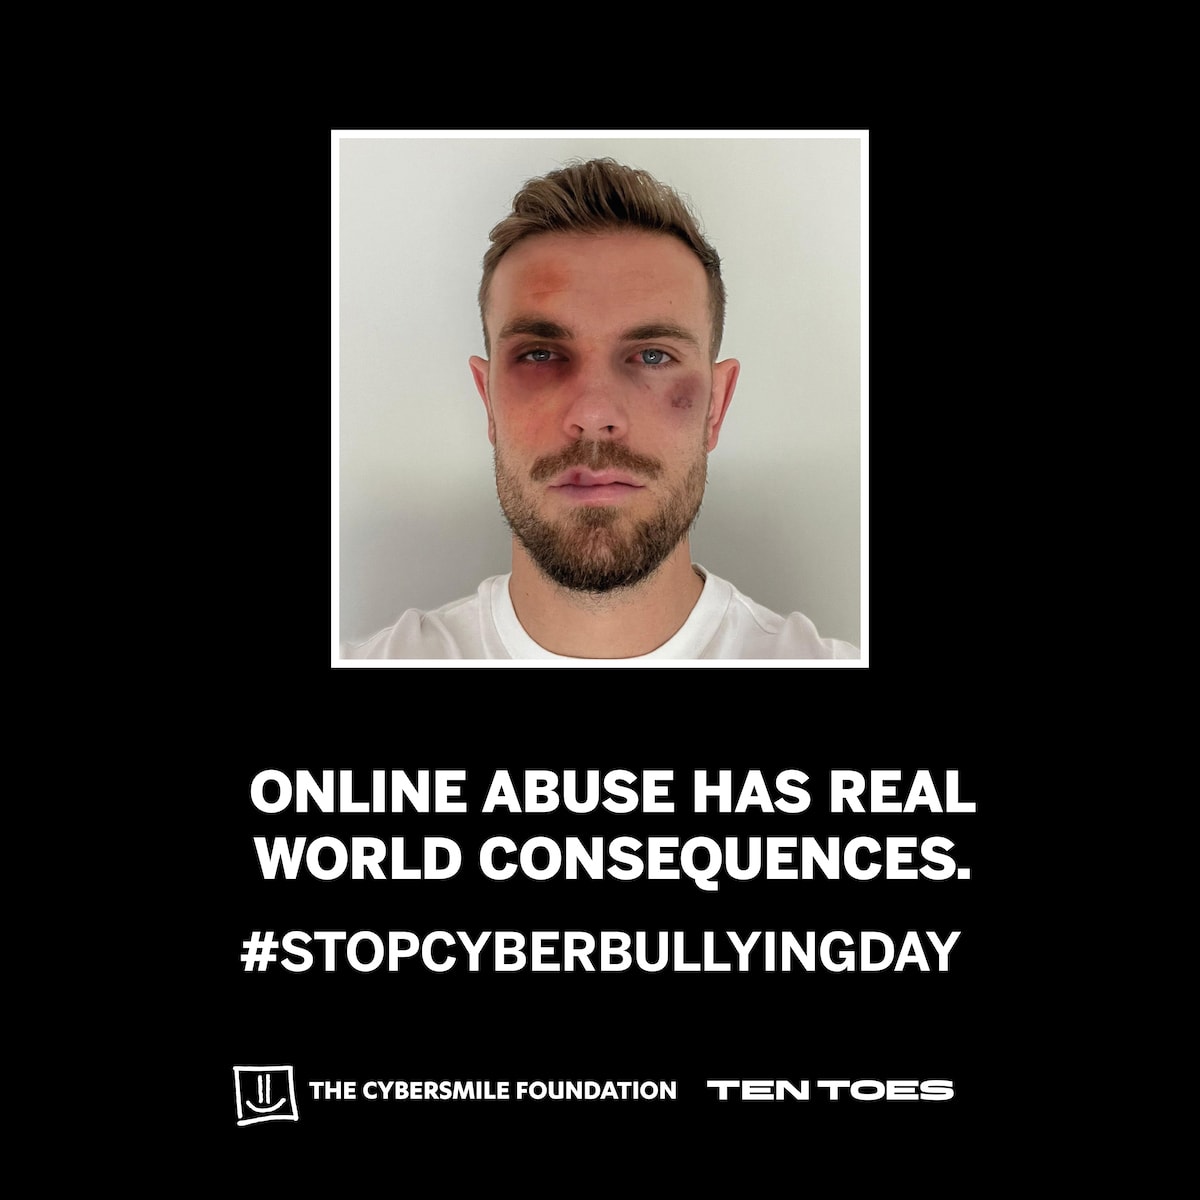 Cybersmile-and-Ten-Toes-launch-Stop-Cyberbullying-Day-football-campaign